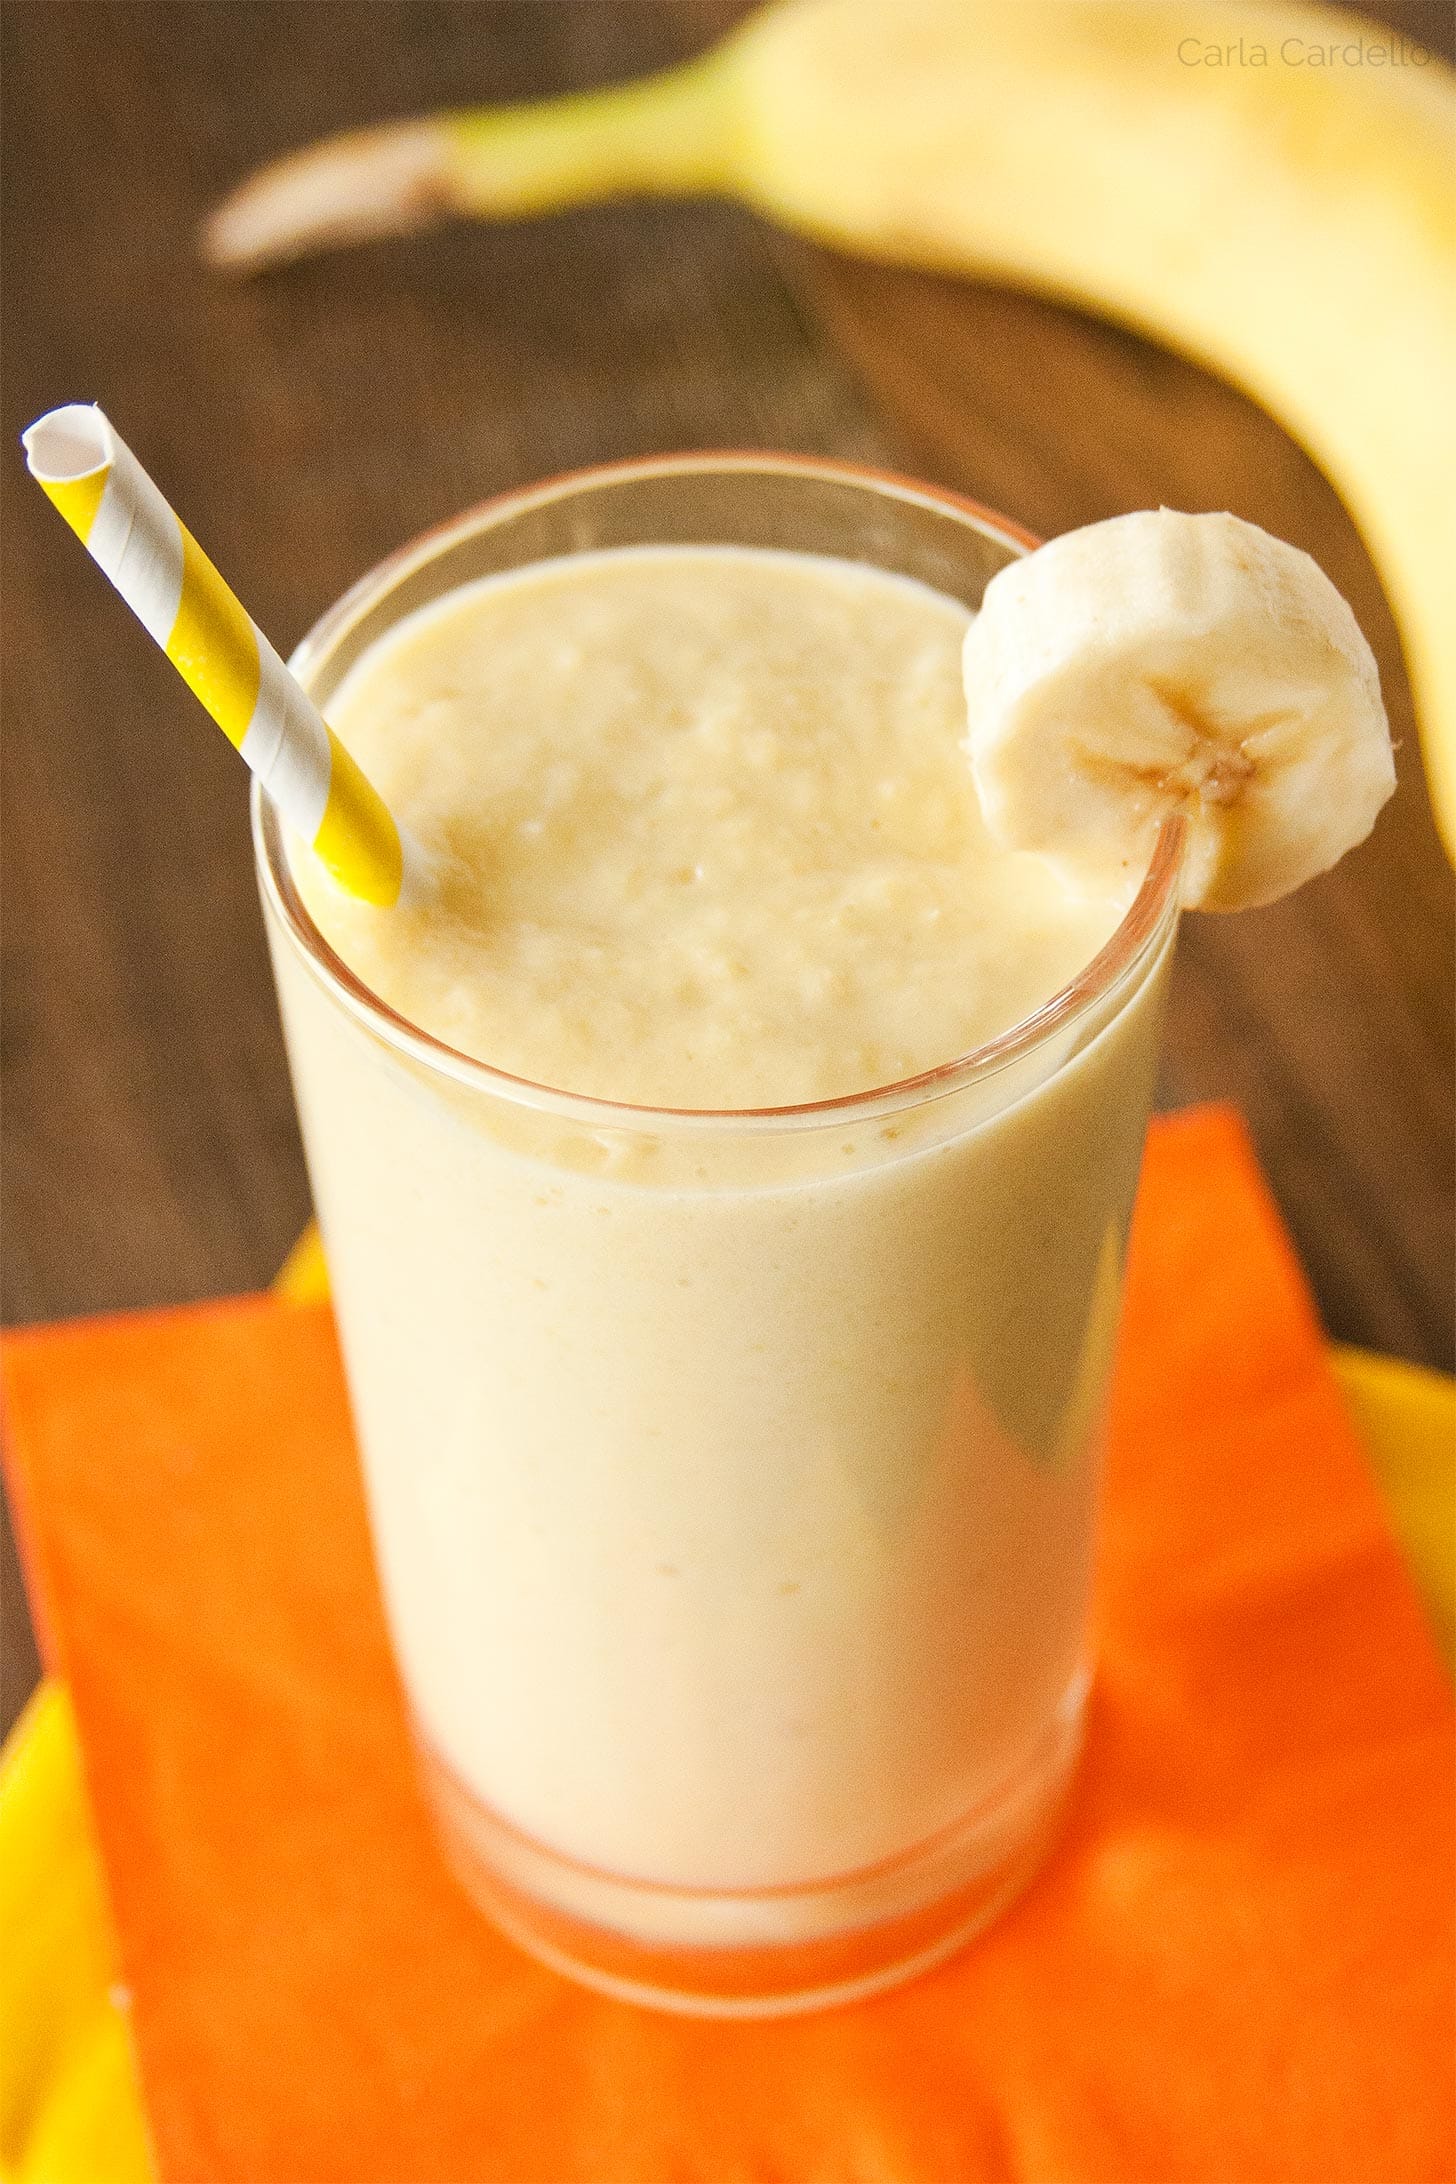 Banana Mango Smoothie in a glass with yellow straw